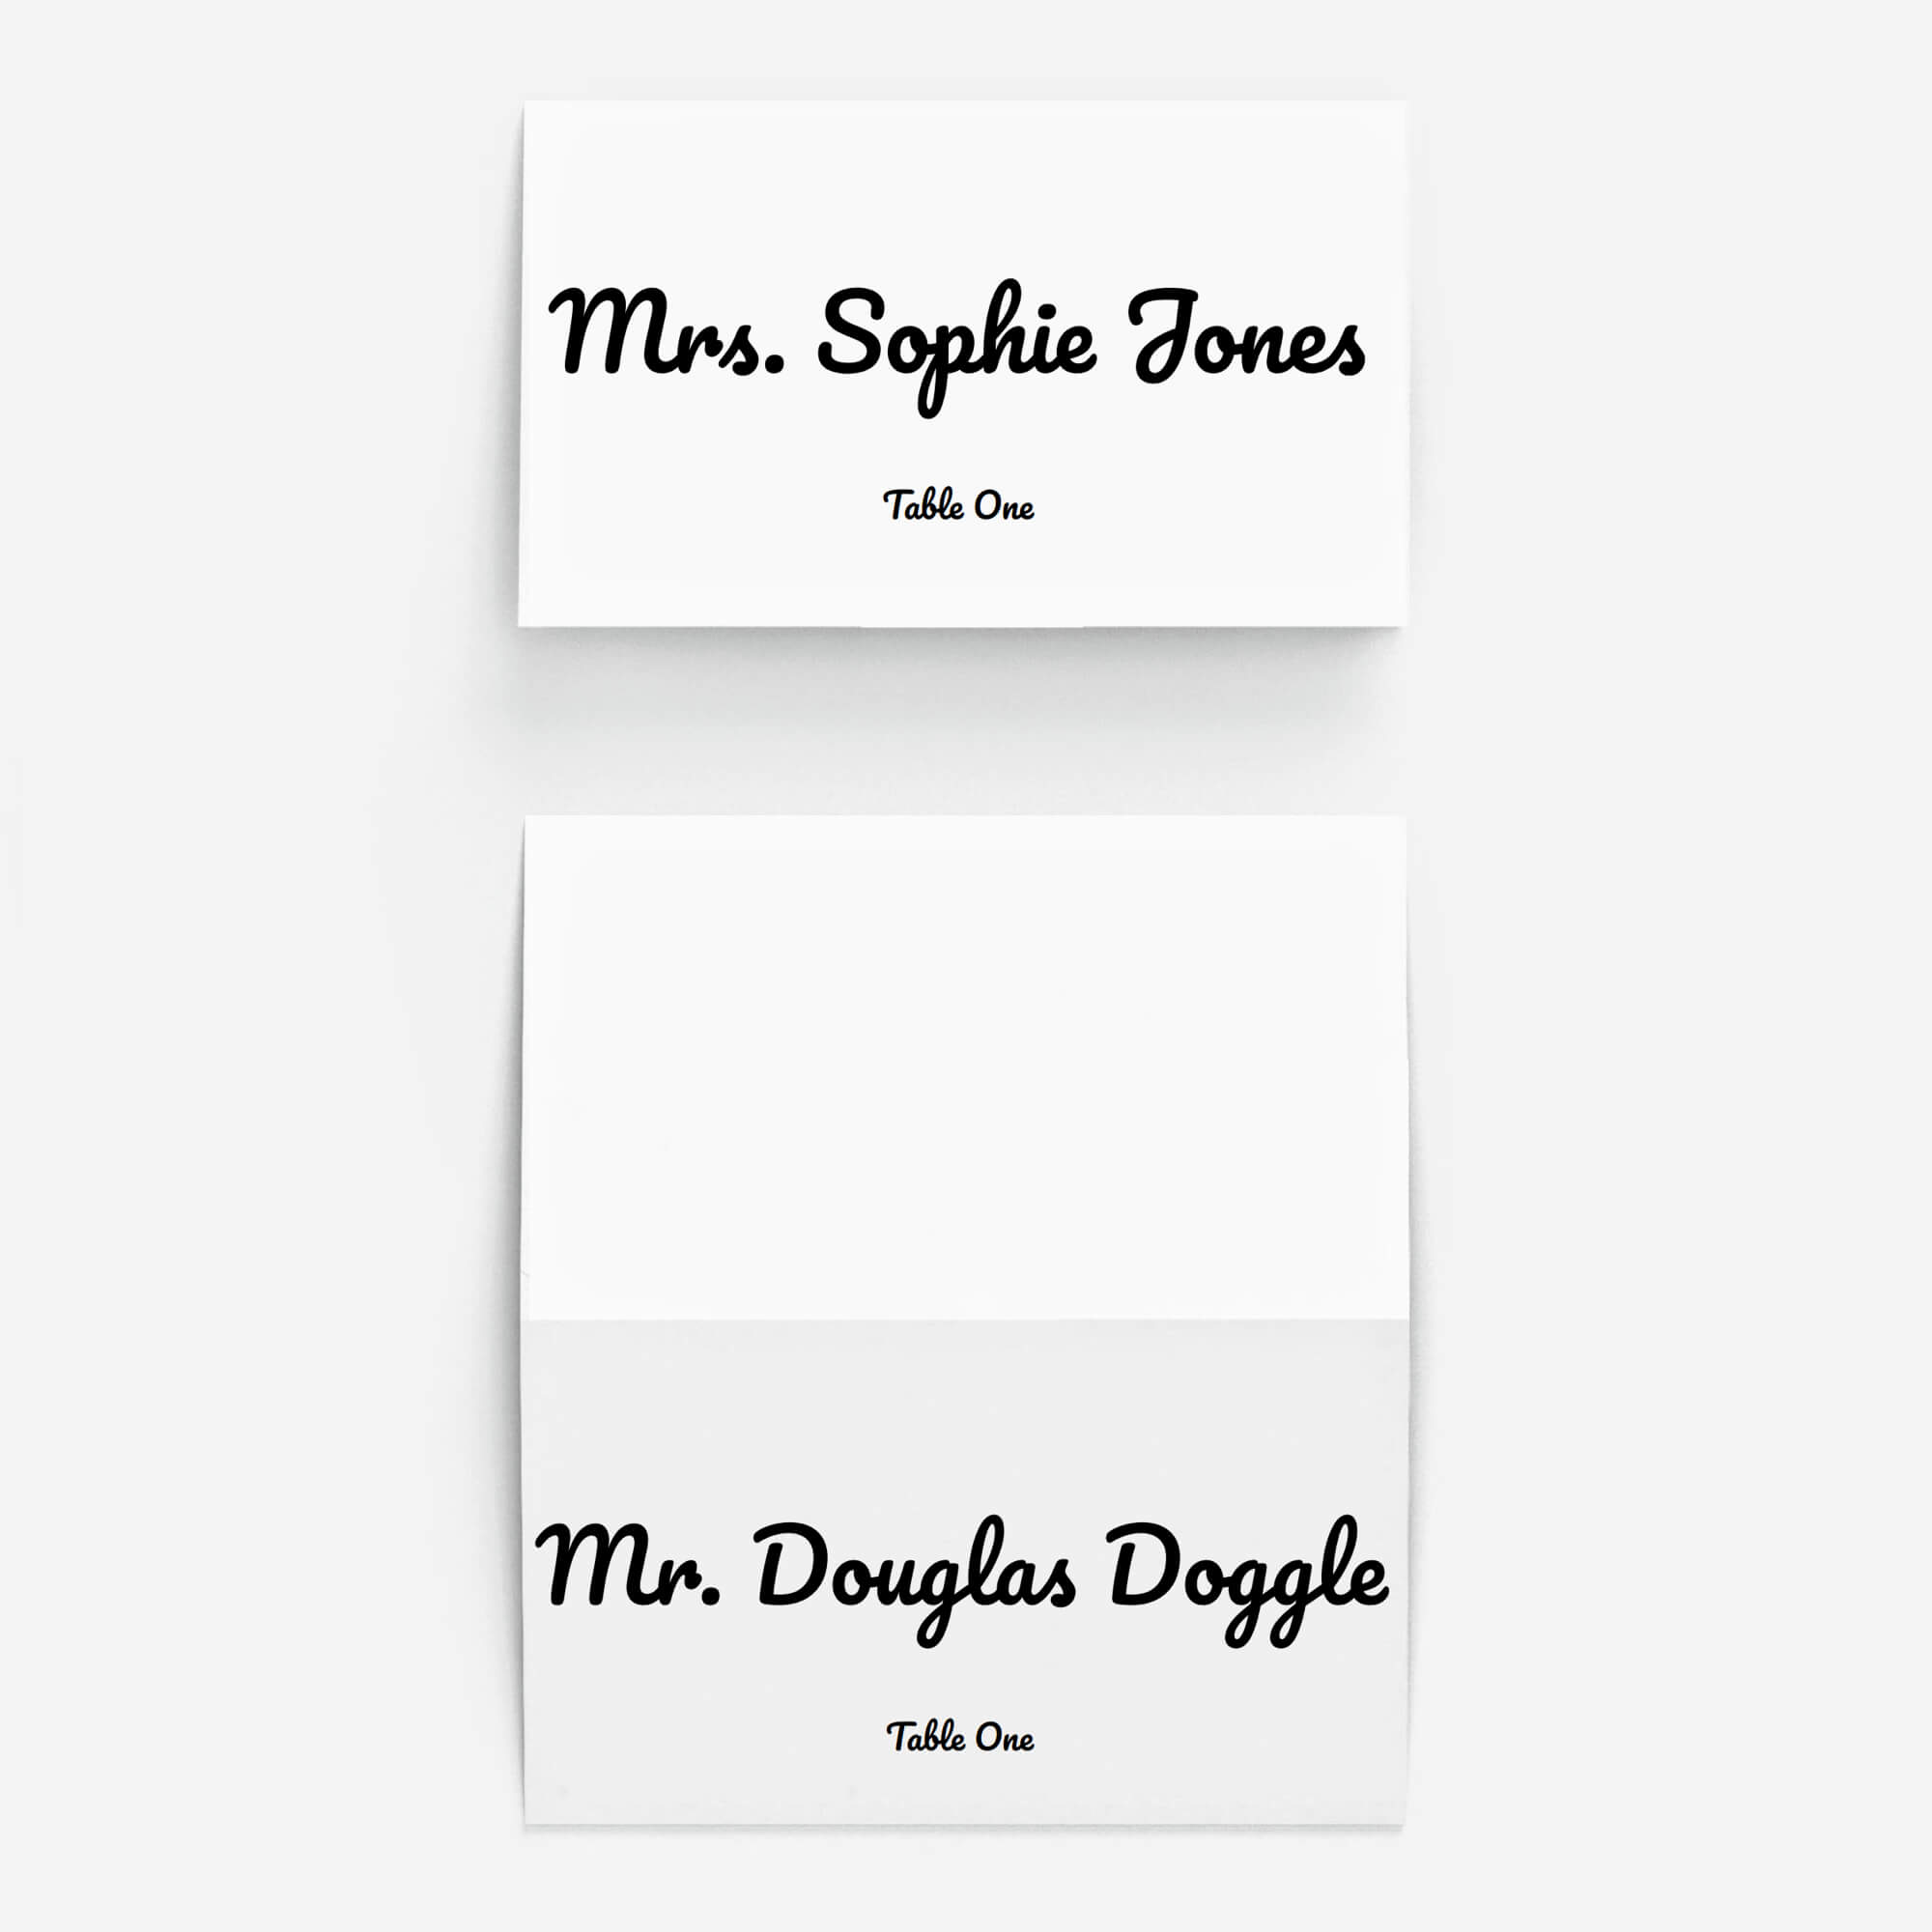 Pinplace Cards Online On 10 Stunning Fonts For Diy Regarding Celebrate It Templates Place Cards